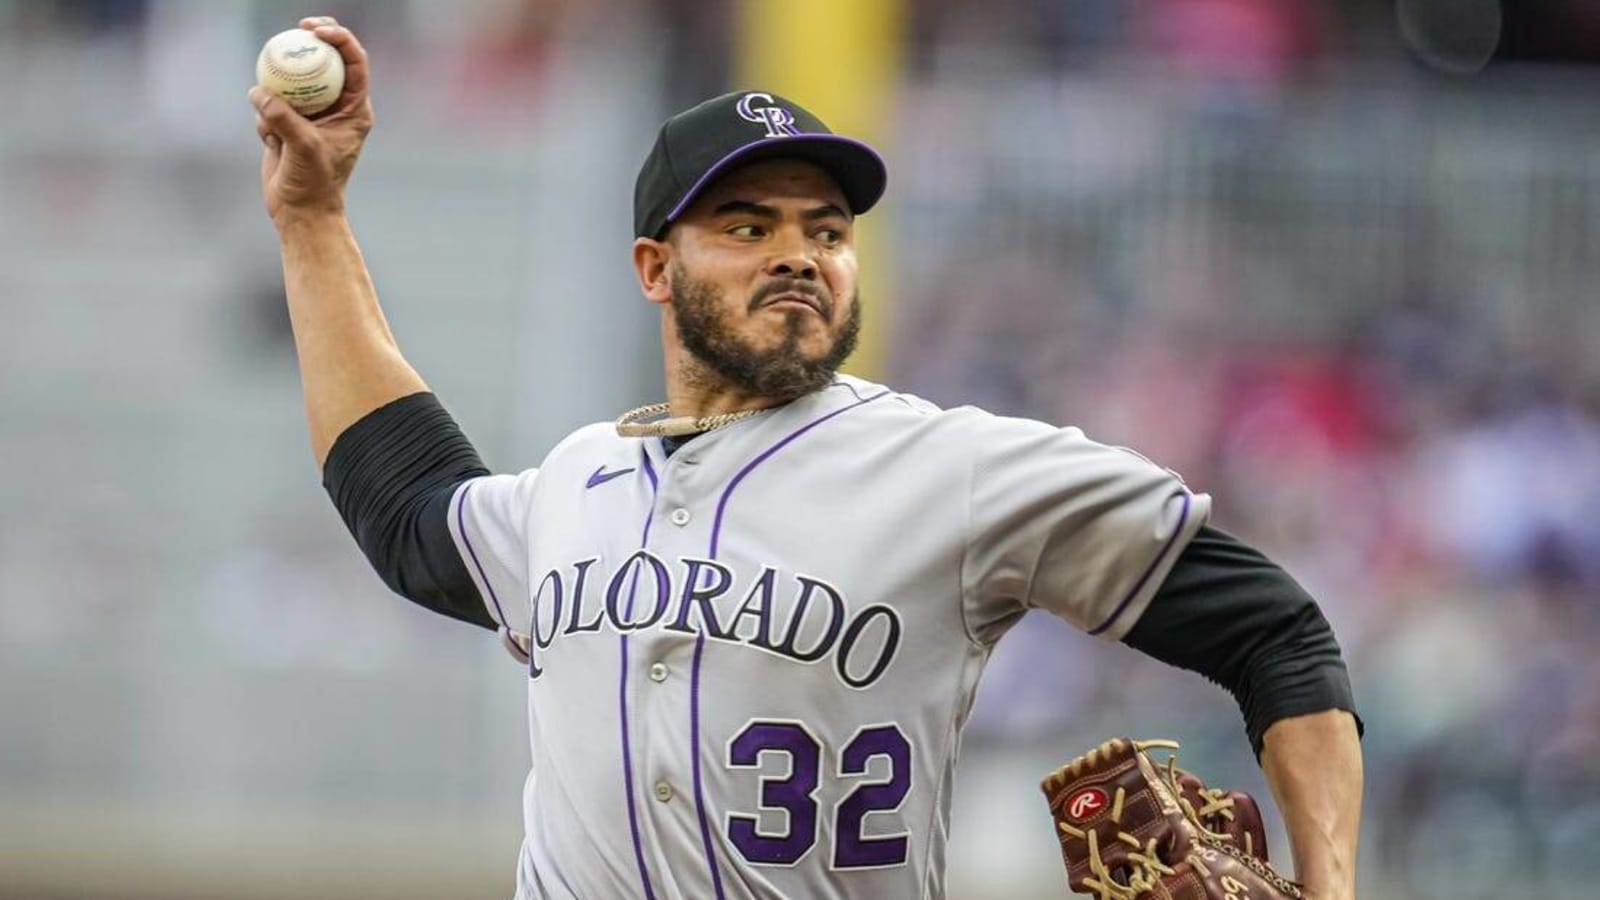 Rockies designate RHP Dinelson Lamet for assignment